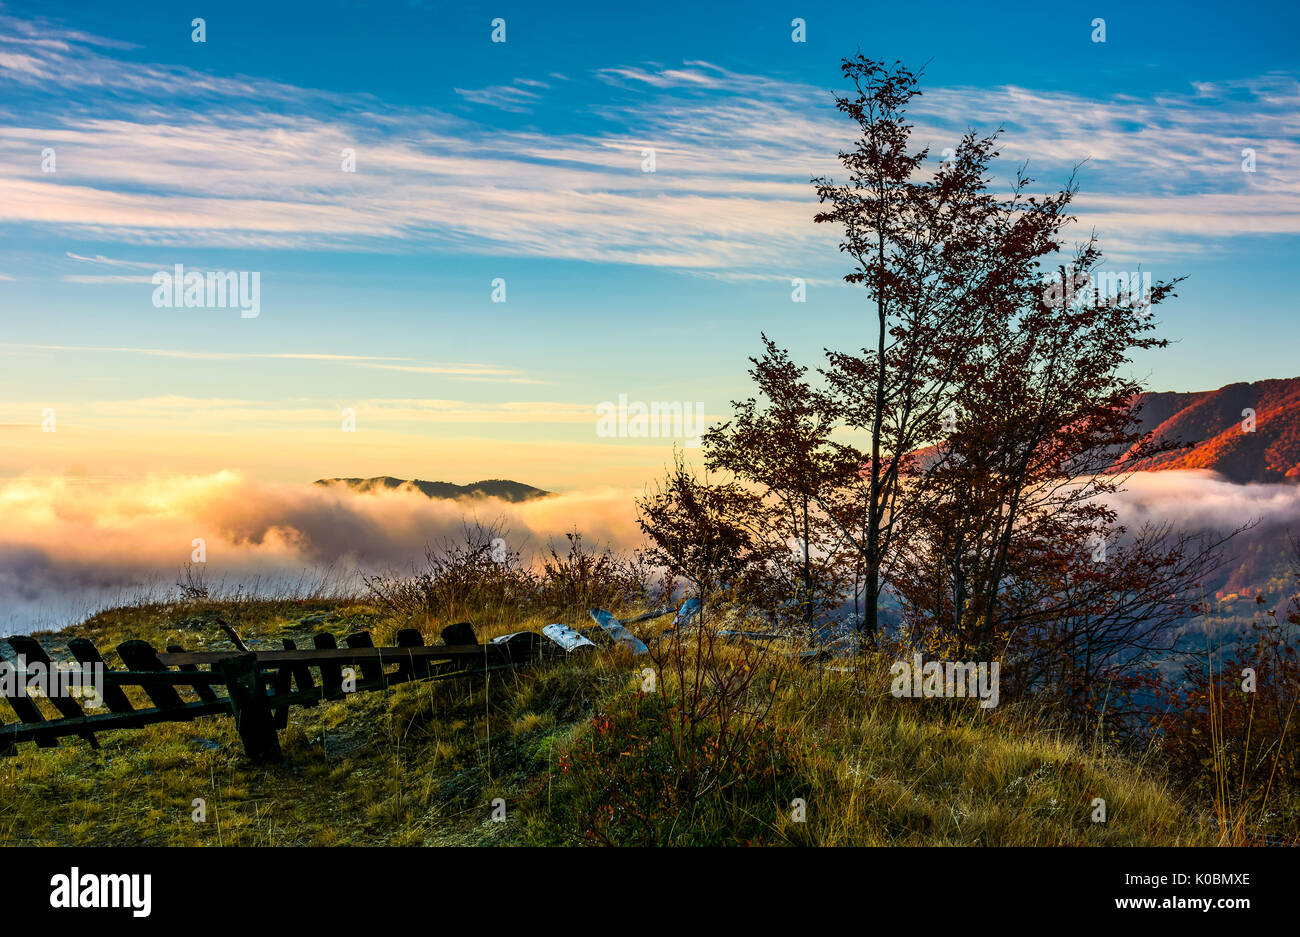 tree on a hump above the ridge and clouds at sunrise. exquisite autumnal scenery in mountainous landscape Stock Photo